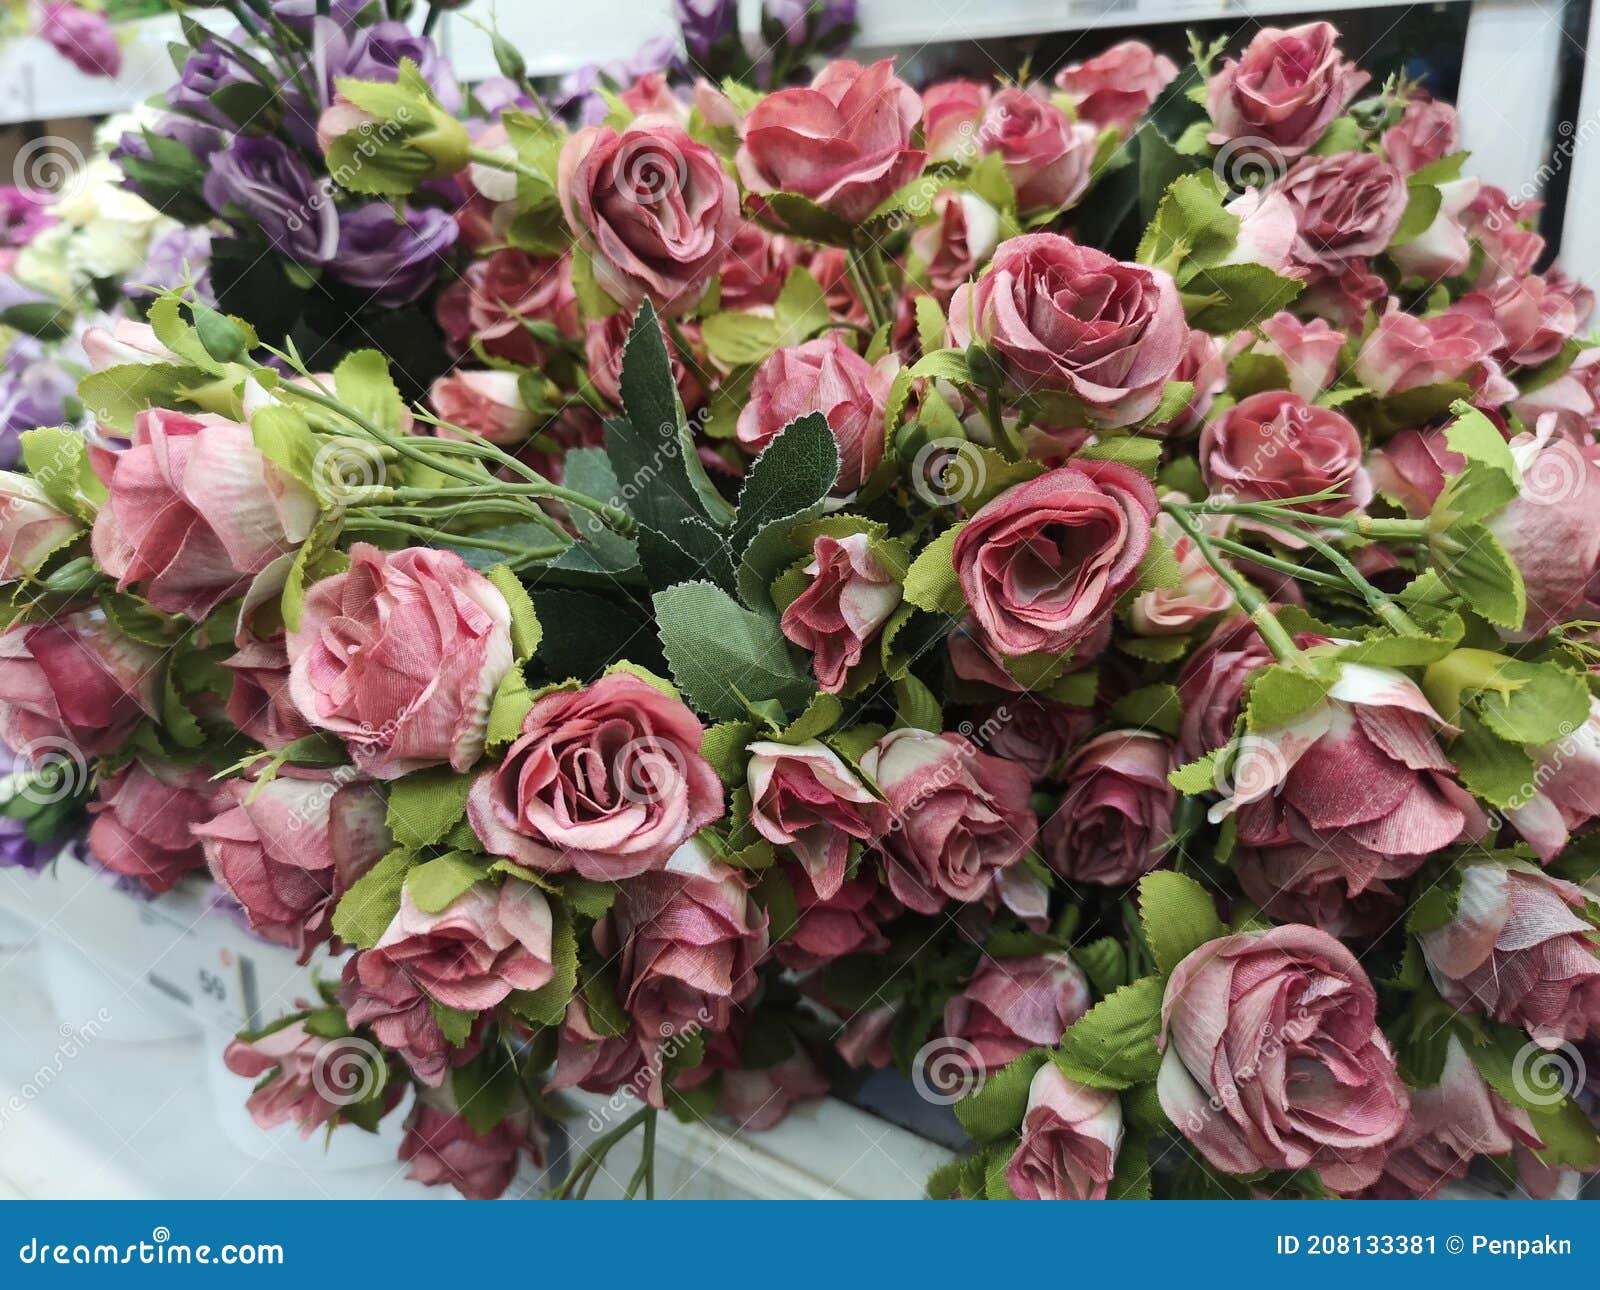 https://thumbs.dreamstime.com/z/red-dark-pink-violet-rose-handmade-beautiful-artificial-bouquet-flowers-decoration-ornamental-background-vintage-classic-tone-208133381.jpg